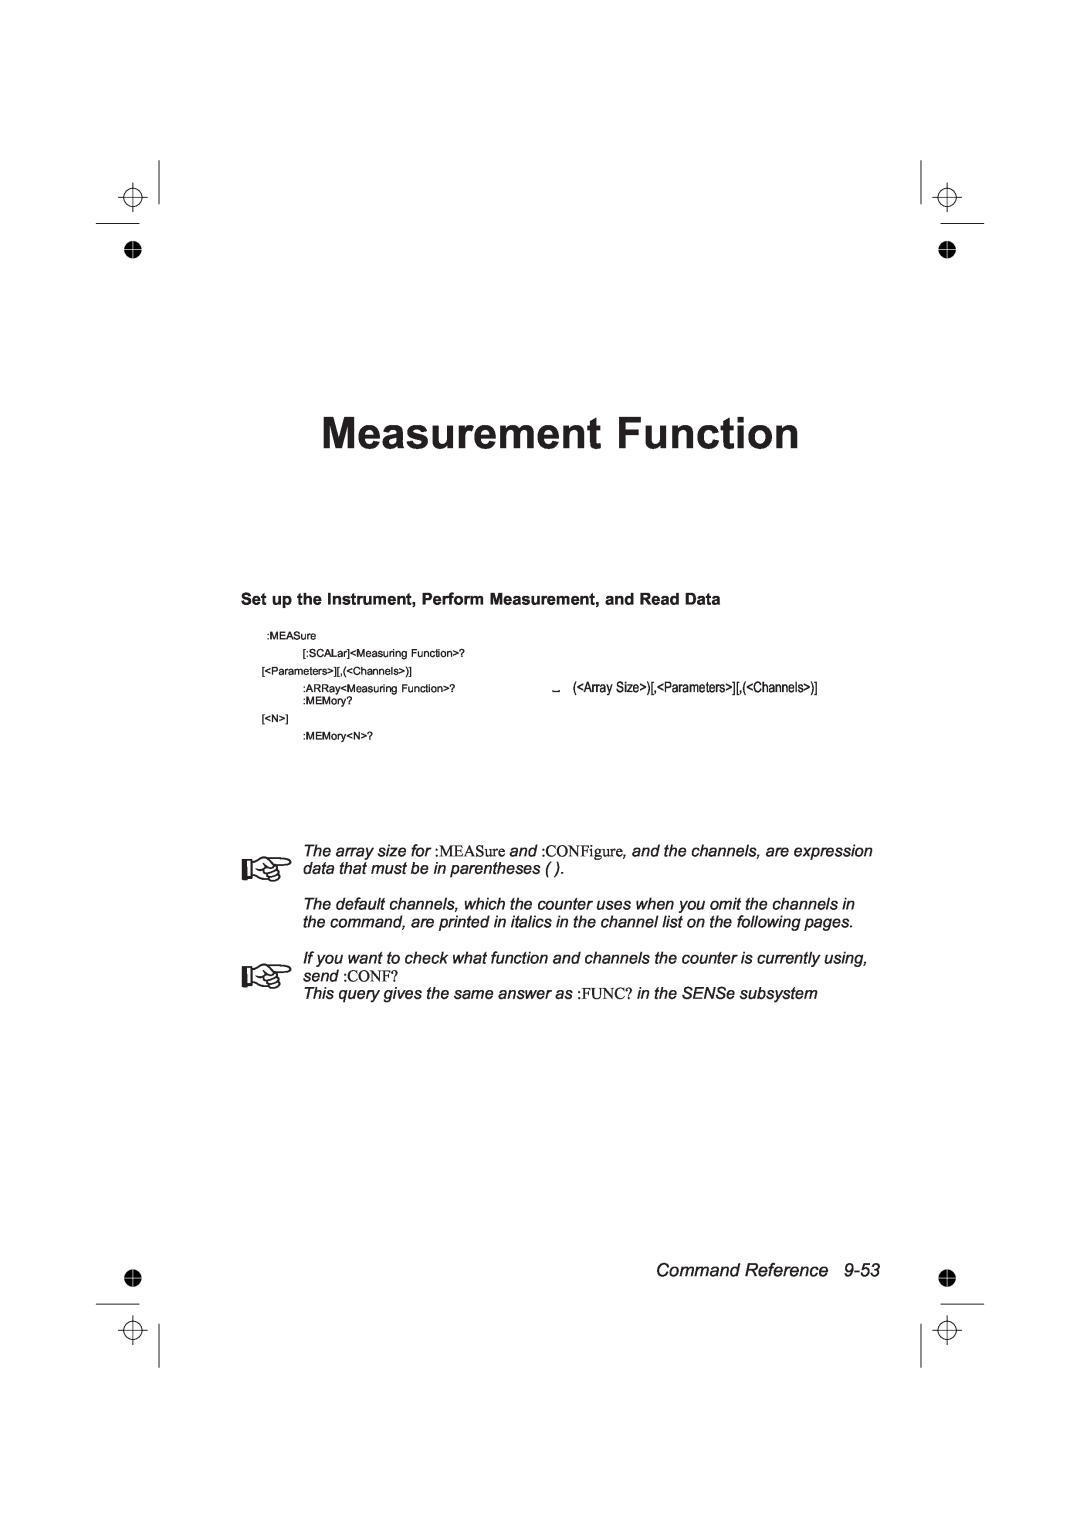 Fluke PM6685, PM6681R Measurement Function, Command Reference, Set up the Instrument, Perform Measurement, and Read Data 